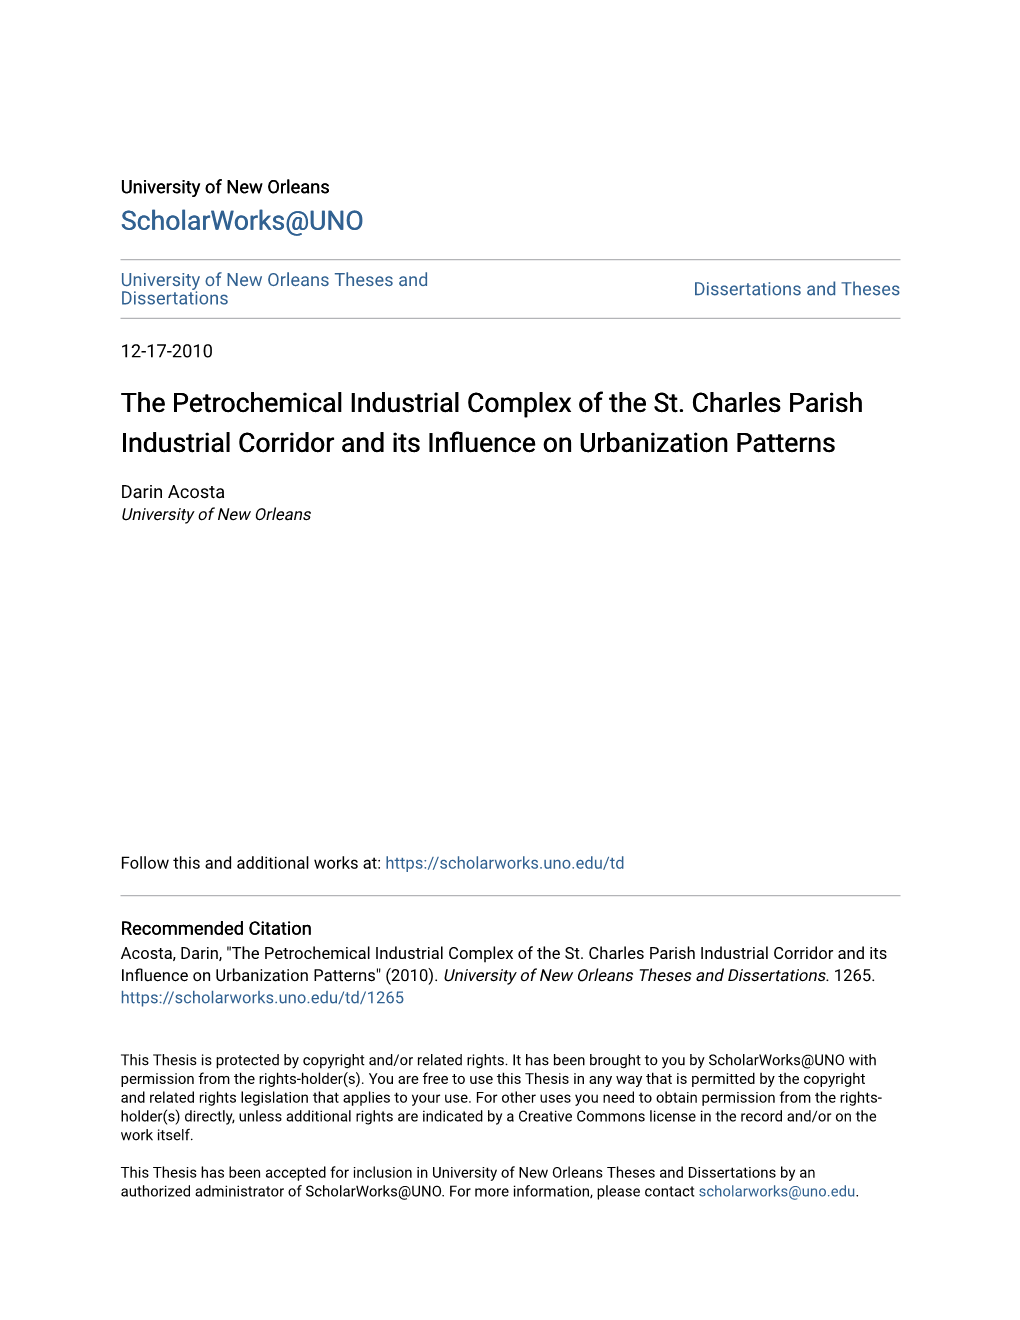 The Petrochemical Industrial Complex of the St. Charles Parish Industrial Corridor and Its Influence on Urbanization Atternsp